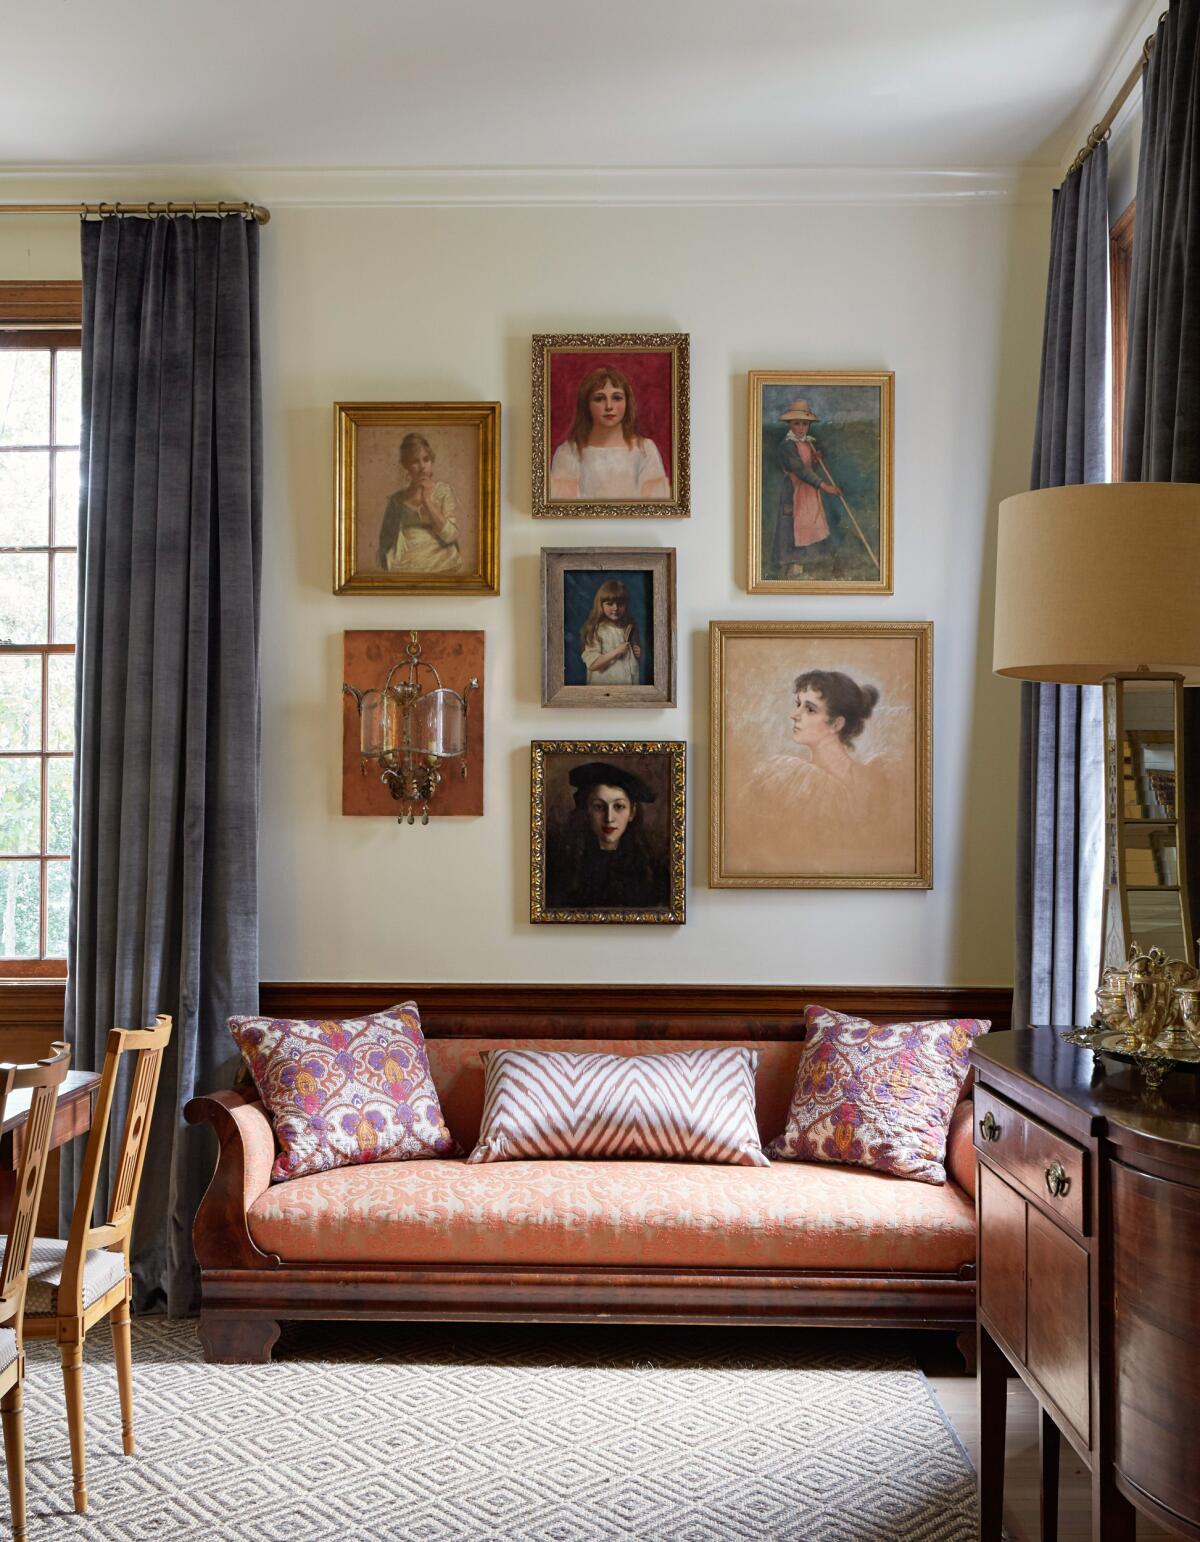 In this dining room, a selection of antique portraits inspired the furnishings and overall vibe of the space.